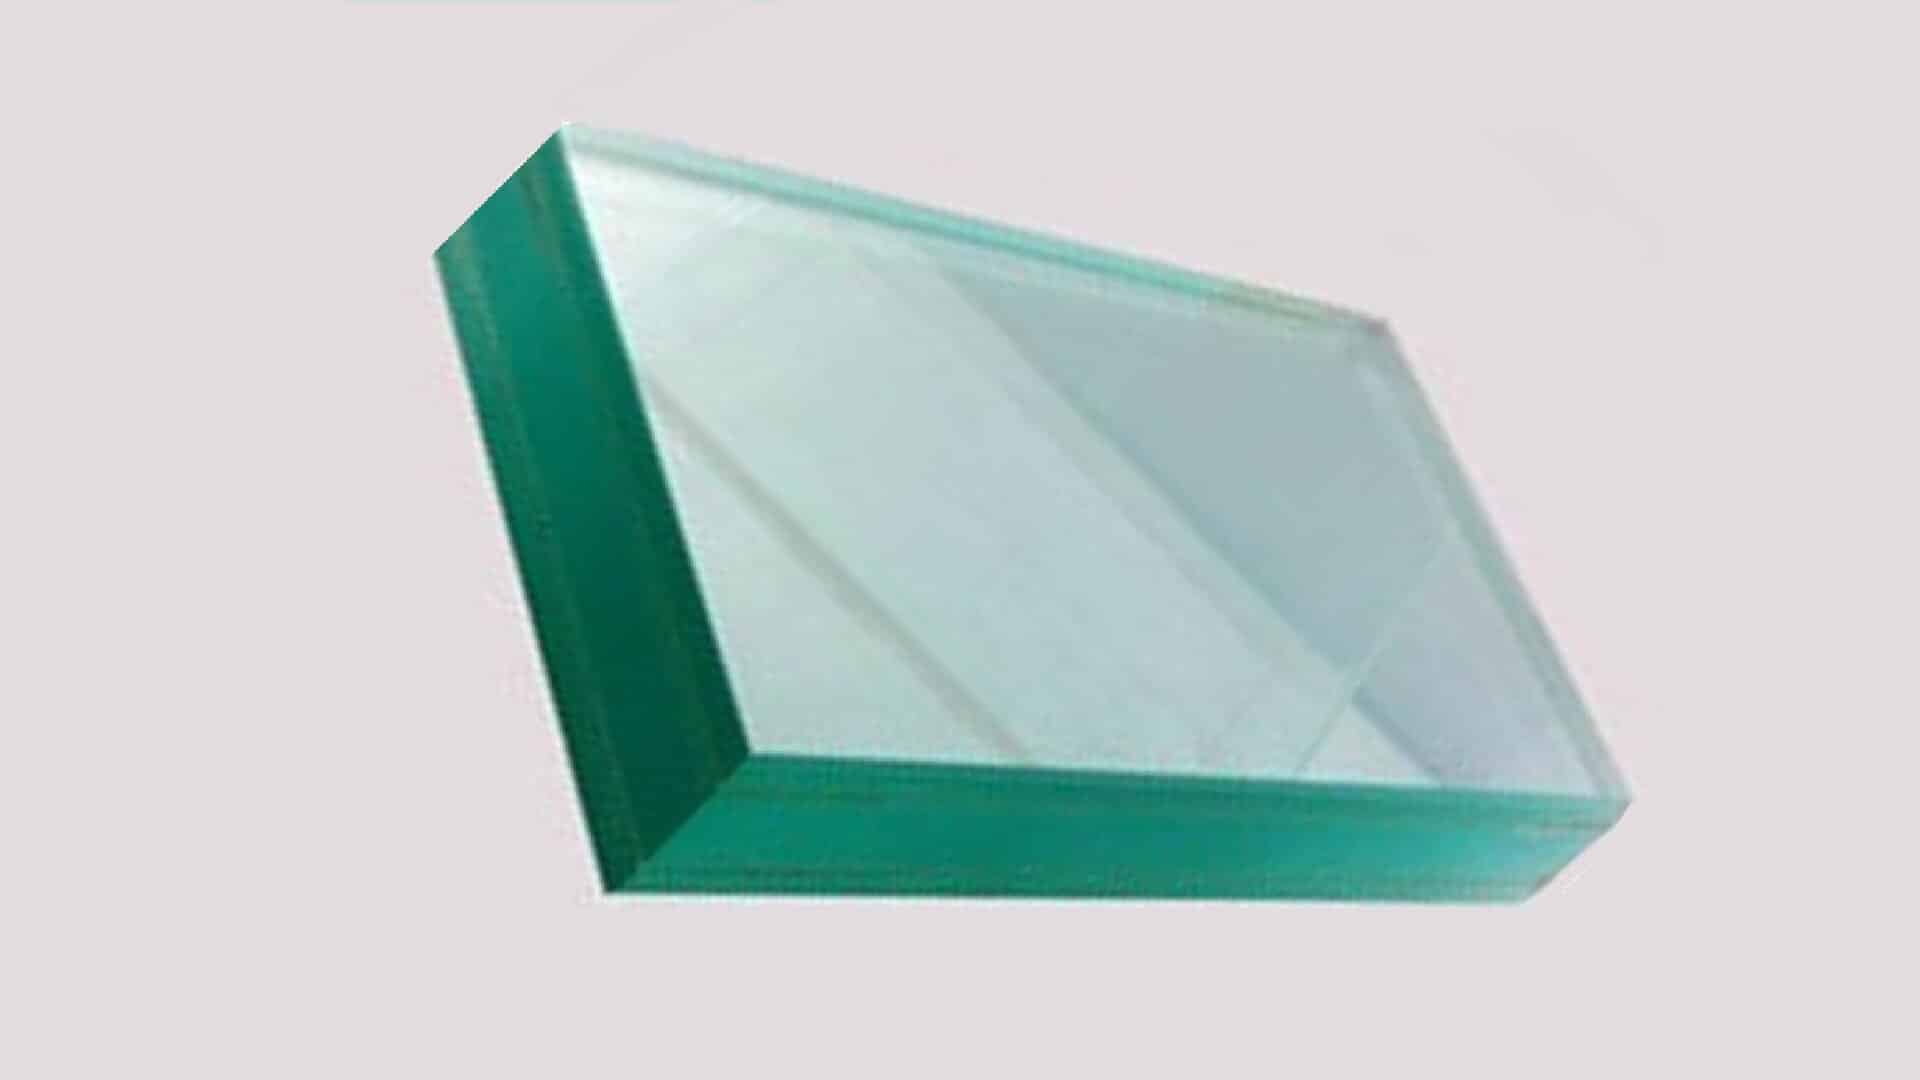 bulleyproof glass sample